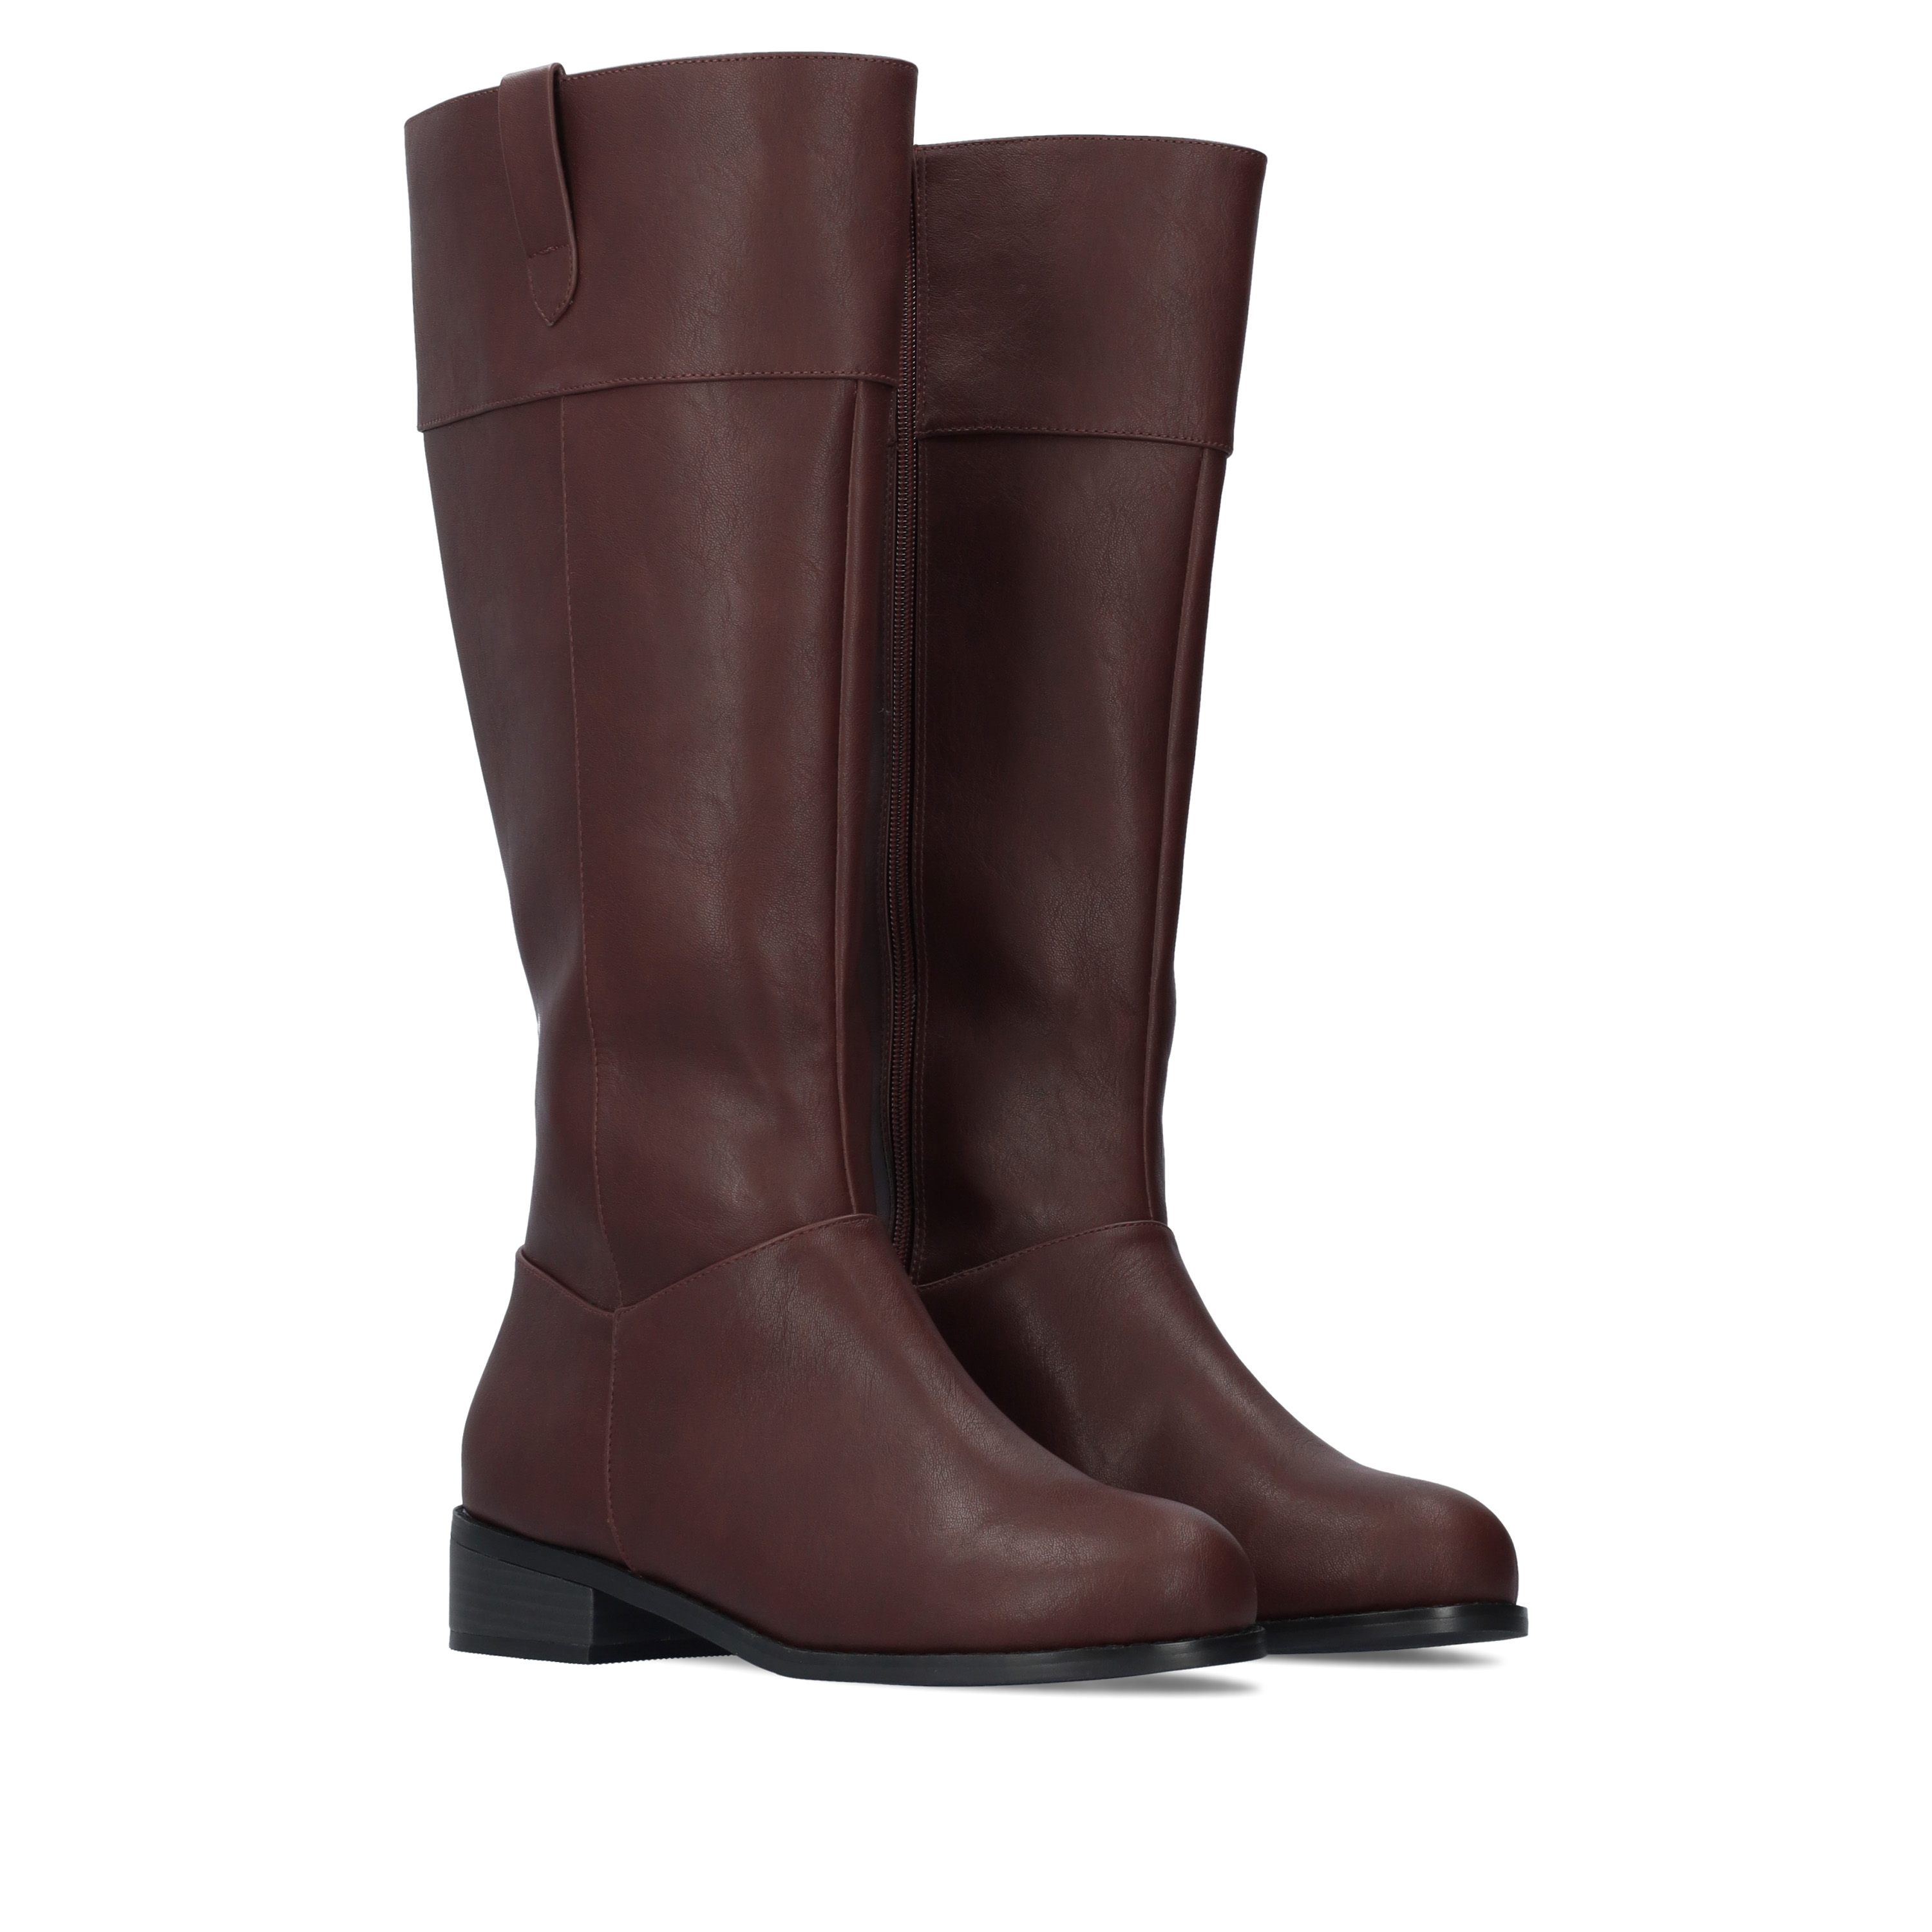 Flat high-calf boots in burgundy faux leather. 